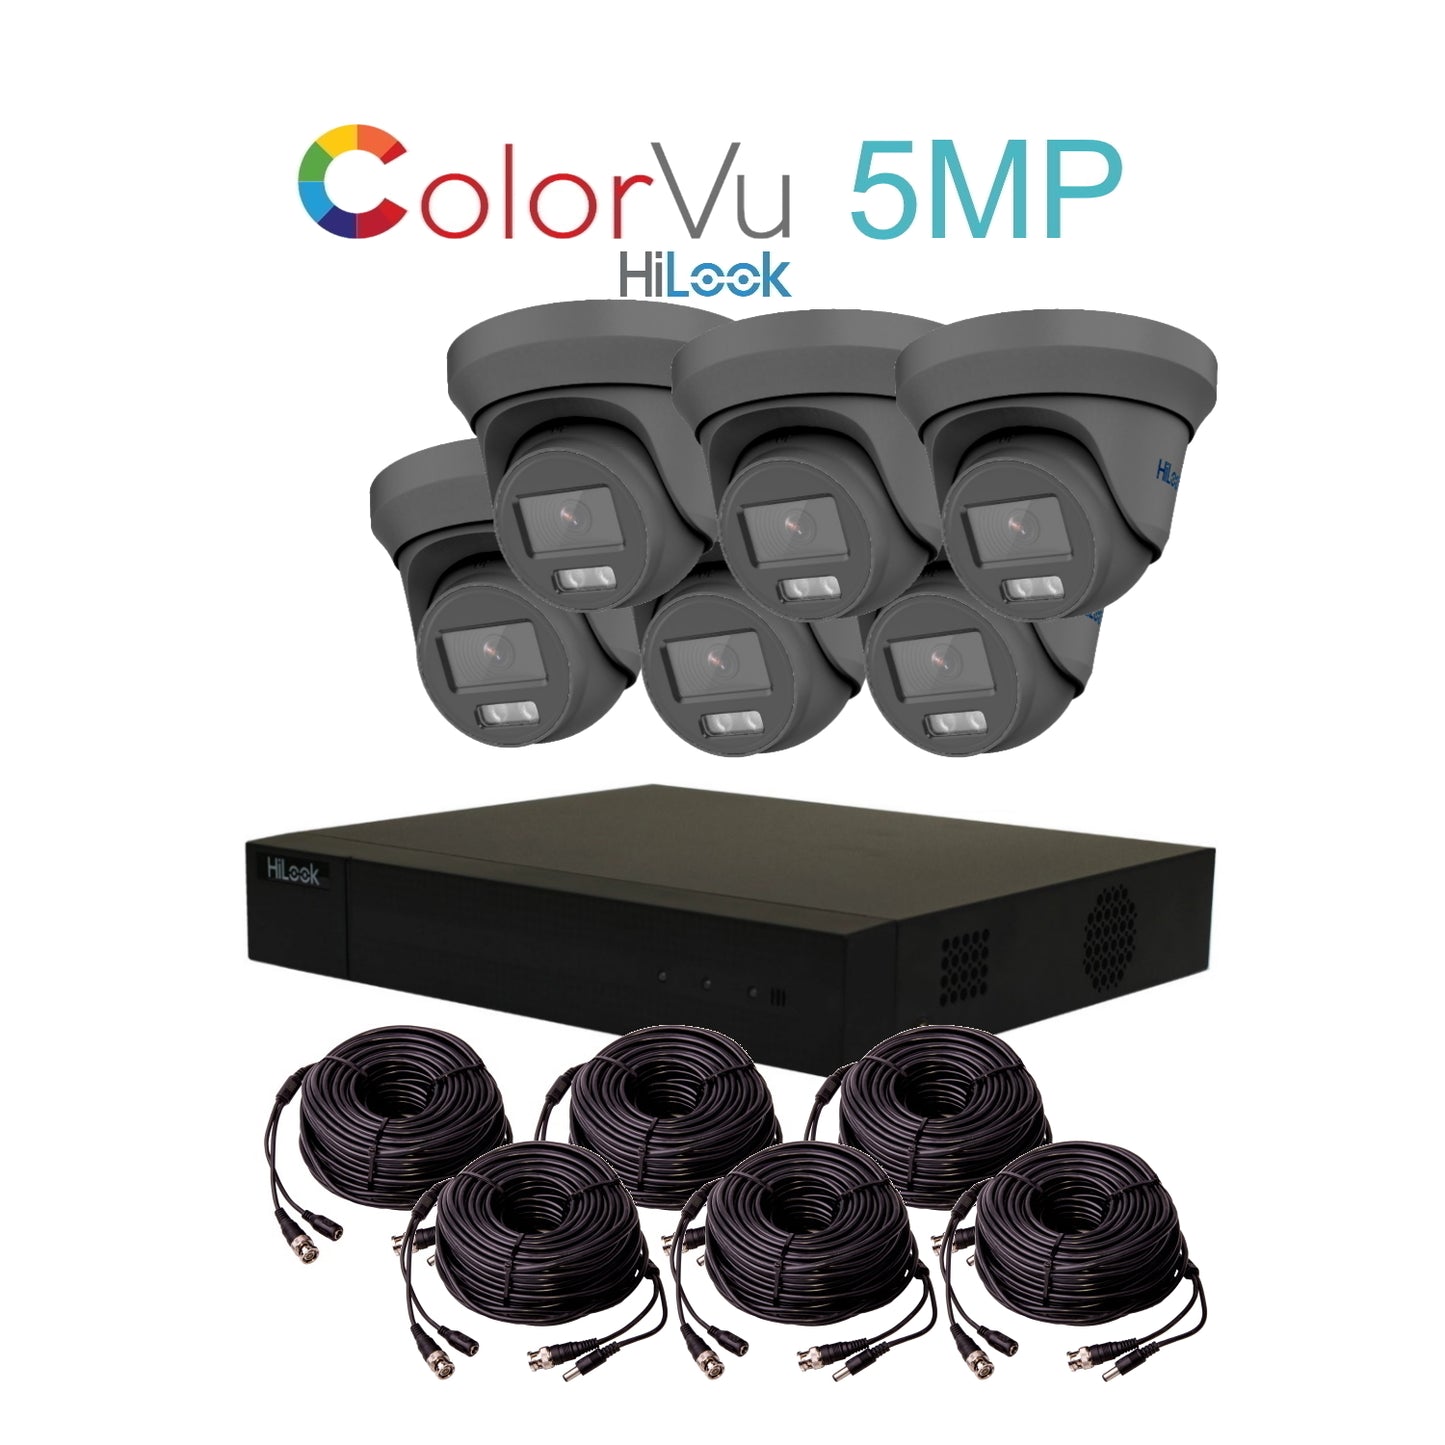 5MP HiLook ColorVu TVI CCTV Kit With 6 Cameras, Built-in Mic, 4TB HDD & Ready Made Cables